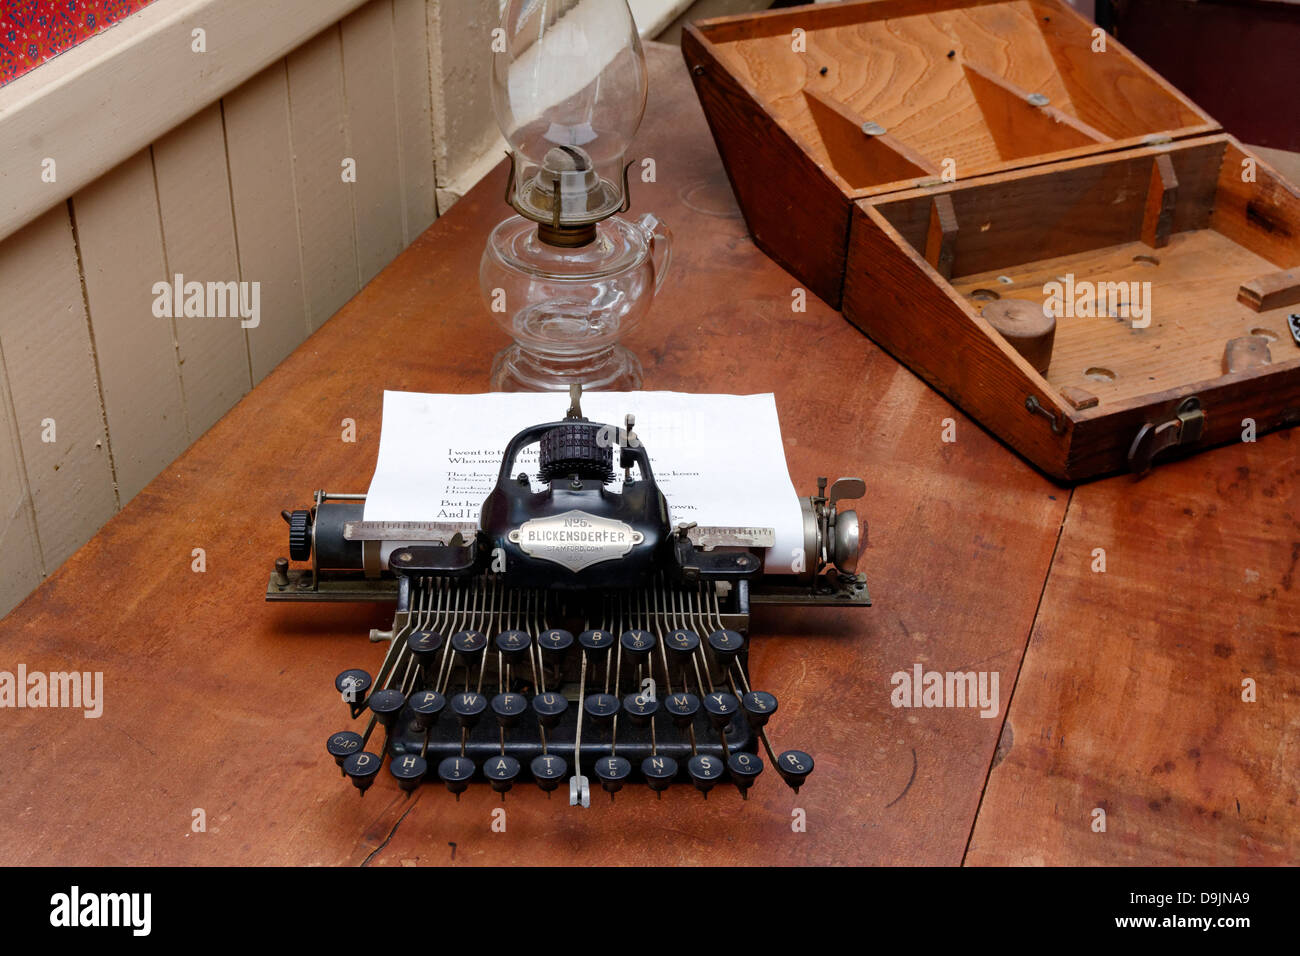 Introduced in 1893, Blickensderfer 5 was one of the first portable typewriters Stock Photo